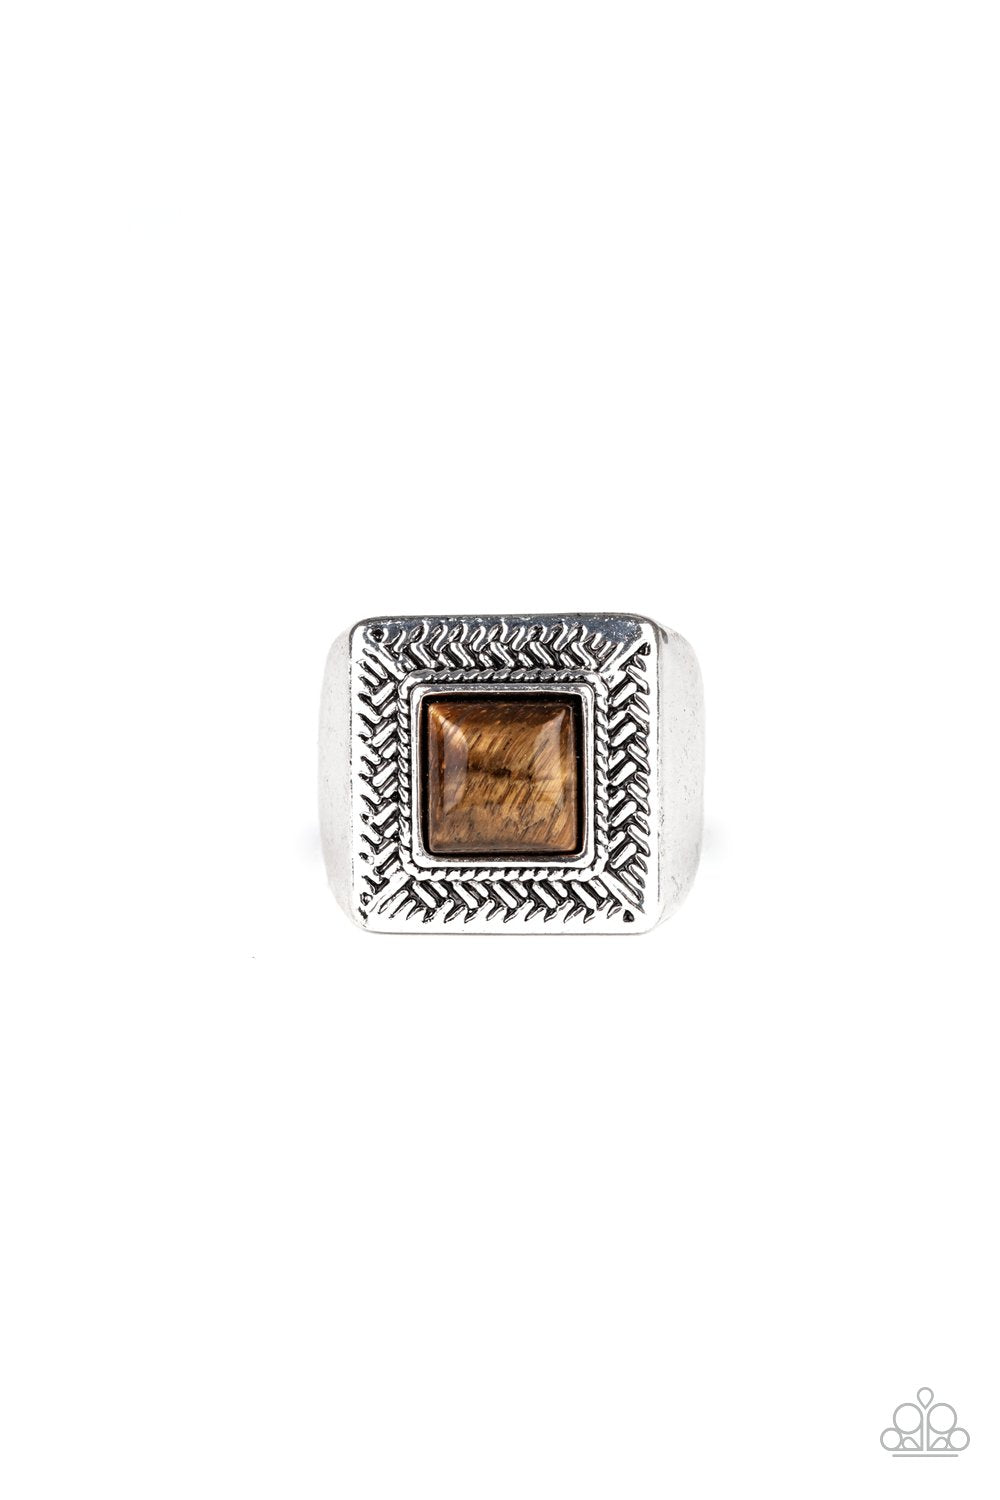 The Wrangler Men's Brown Tiger's Eye and Silver Ring - Paparazzi Accessories- lightbox - CarasShop.com - $5 Jewelry by Cara Jewels